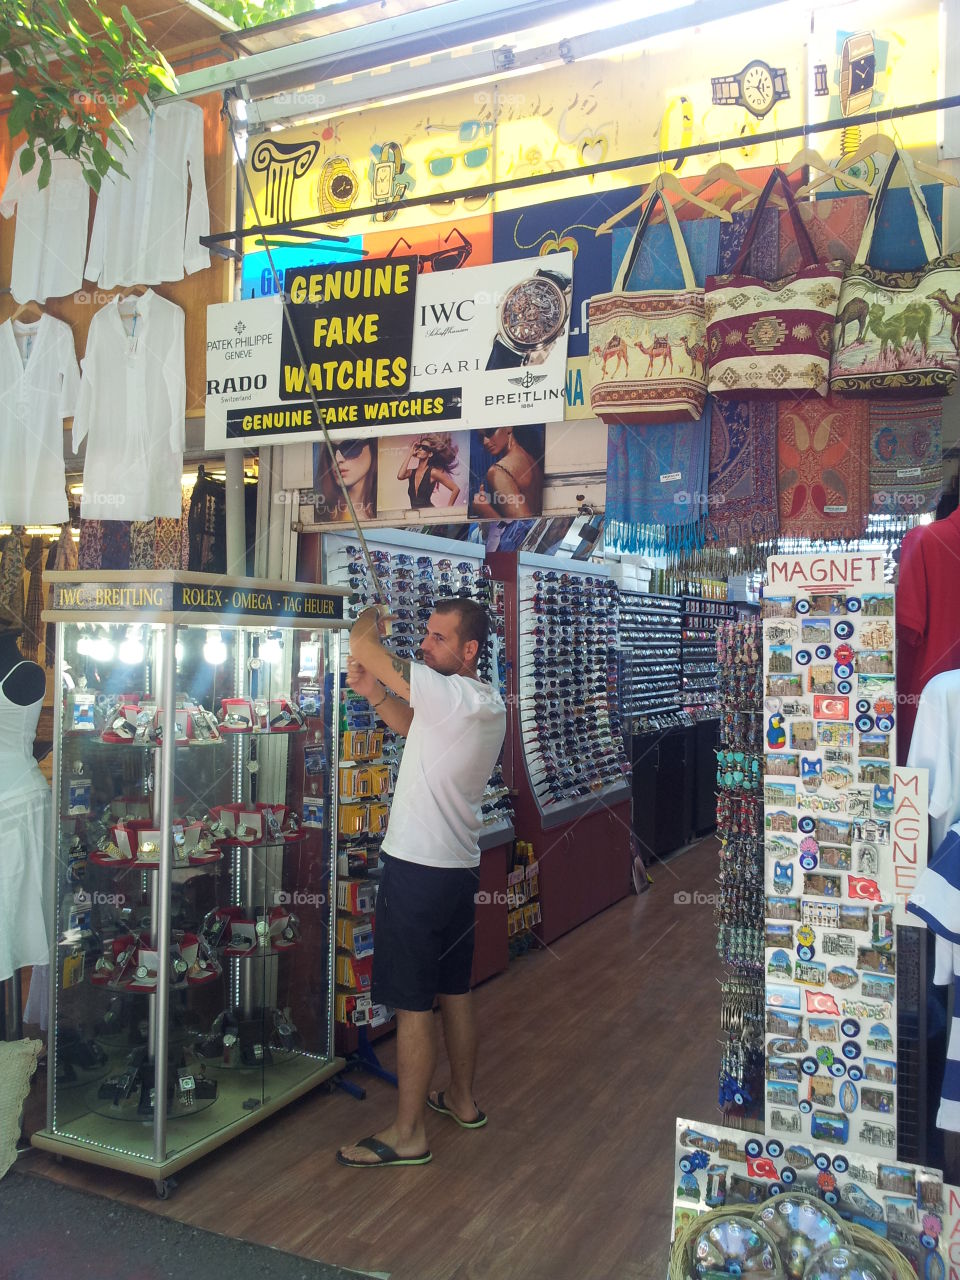 The sign on top reads: genuine fake watches.  This is Ephesus.